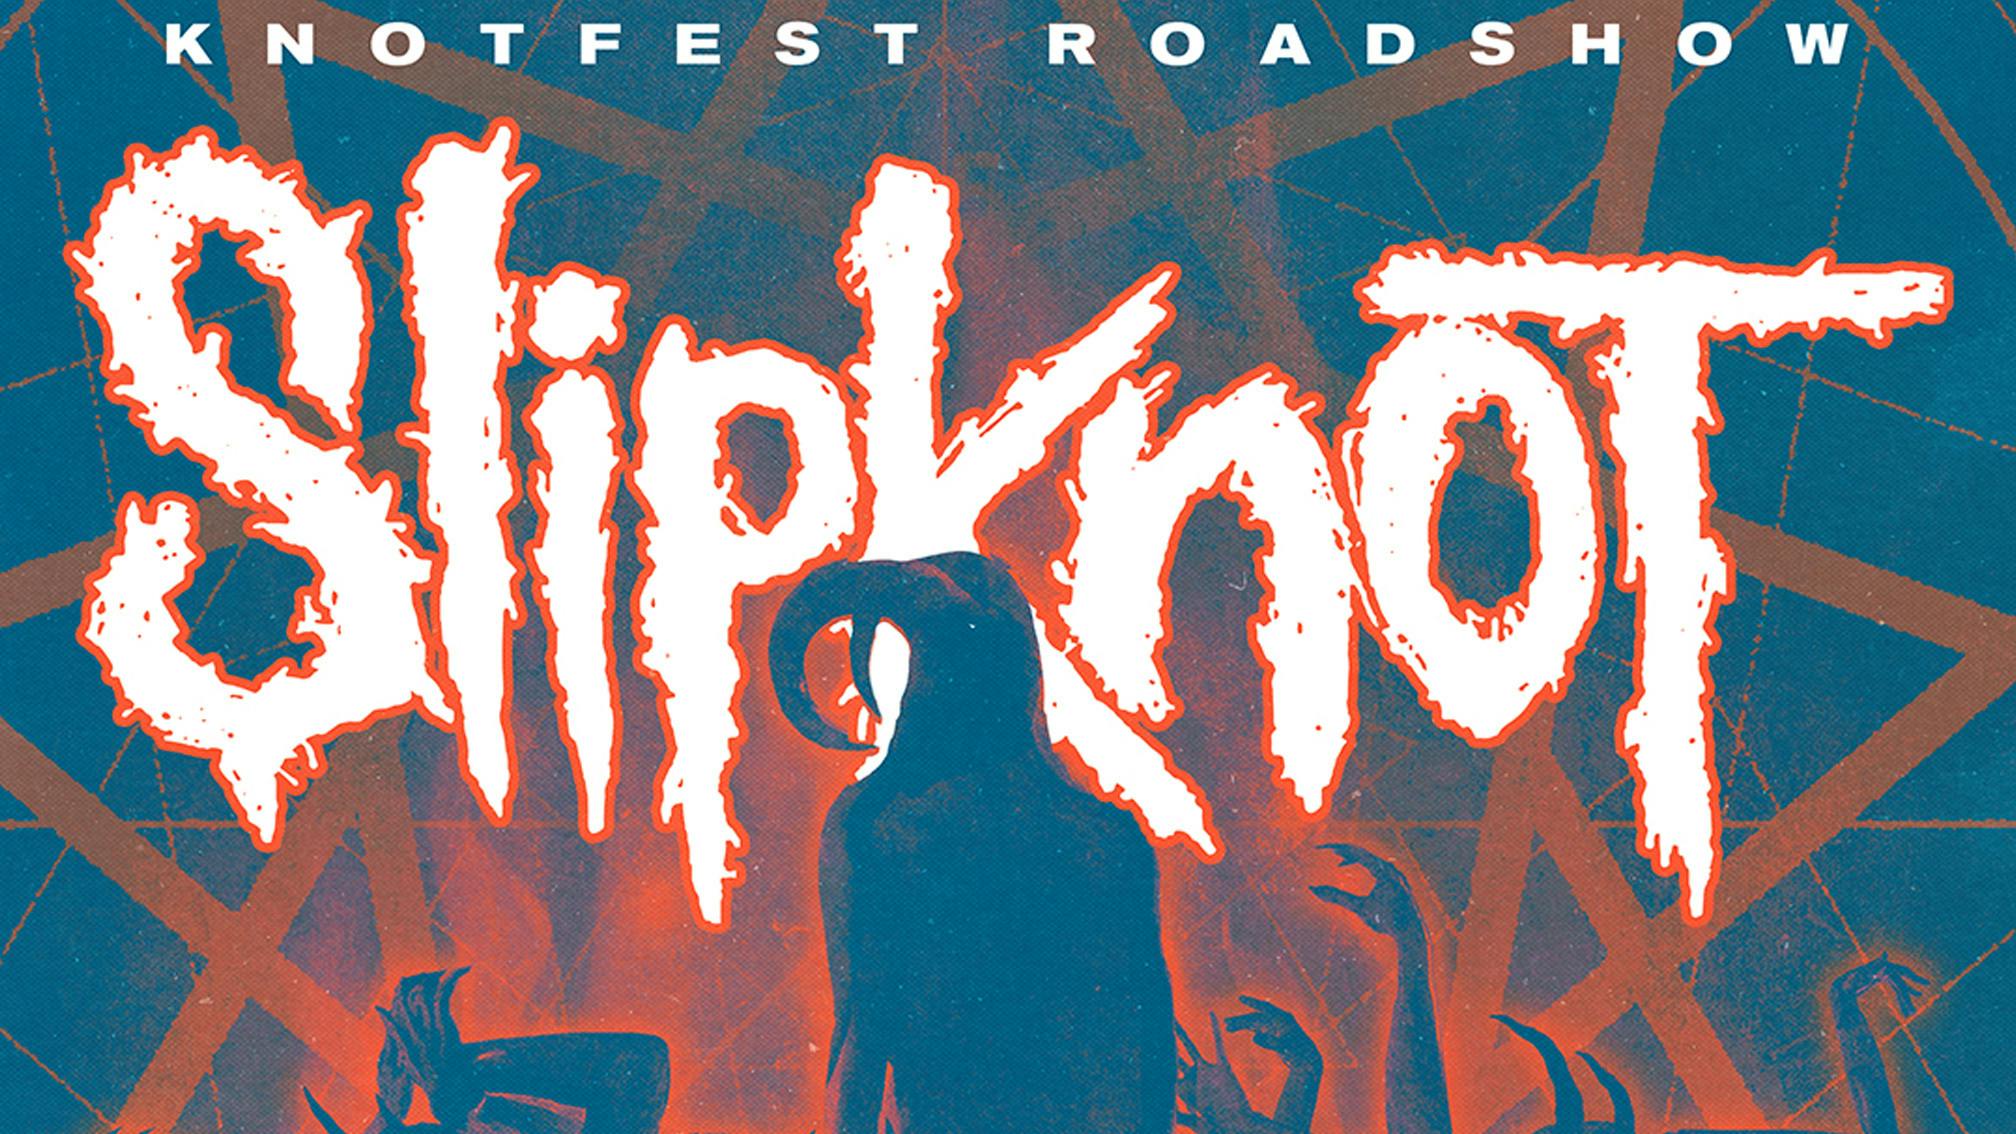 Slipknot: Here's the setlist from their Knotfest Roadshow tour